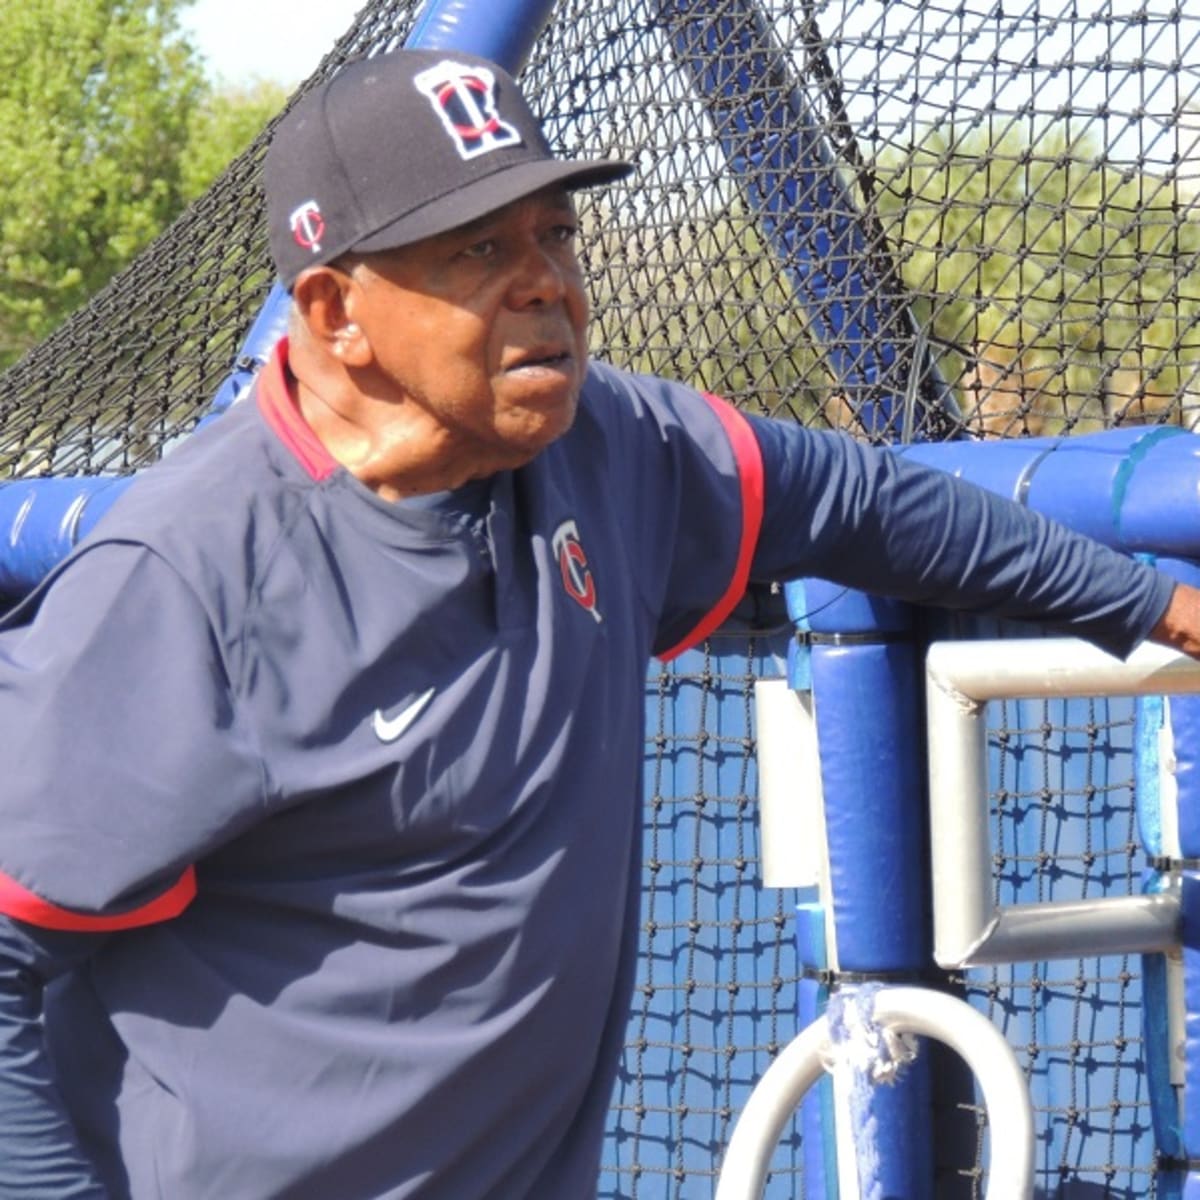 Tony Oliva, who goes into the Hall of Fame this weekend, has a